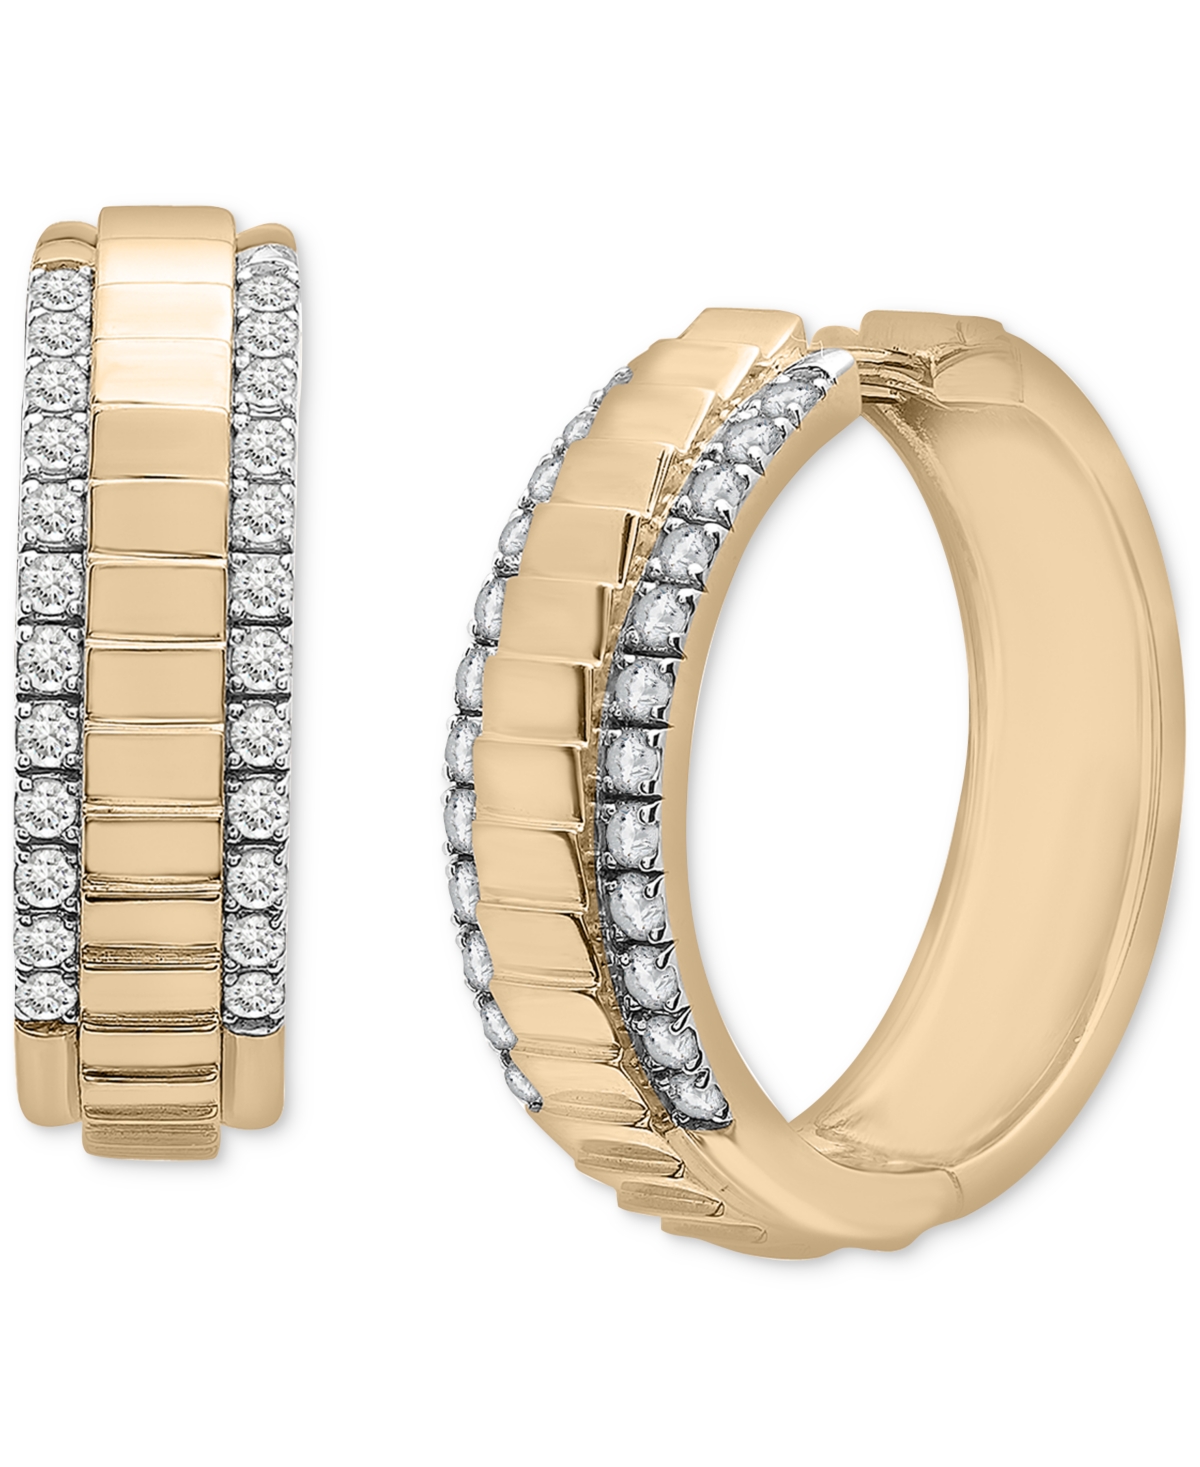 Diamond Border Textured Small Hoop Earrings (1/2 ct. t.w.) in Gold Vermeil, Created for Macy's - Gold Vermeil